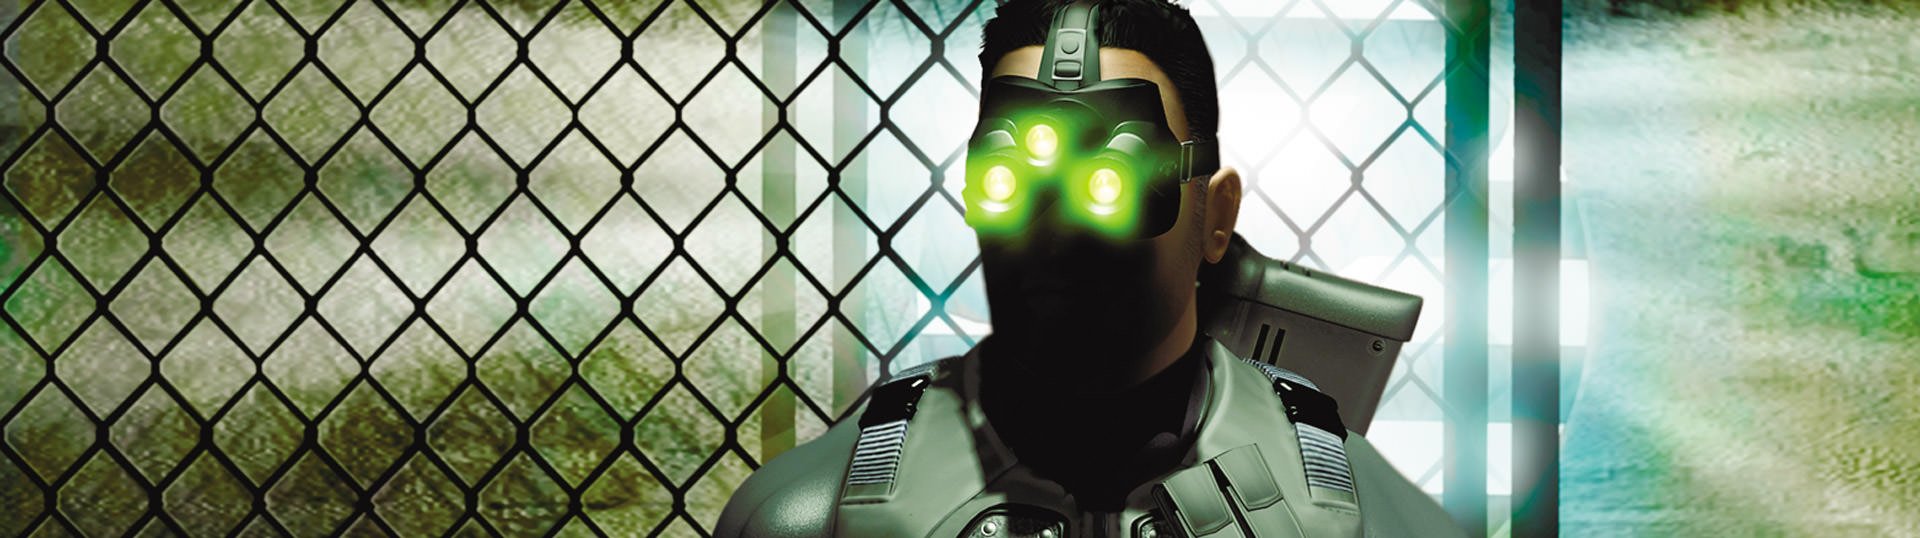 Infiltrate terrorists' positions, acquire critical intelligence by any means necessary, execute with extreme prejudice, and exit without a trace! You are Sam Fisher, a highly trained secret operative of the NSA's secret arm: Third Echelon. The world balance is in your hands, as cyber terrorism and international tensions are about to explode into WWIII.